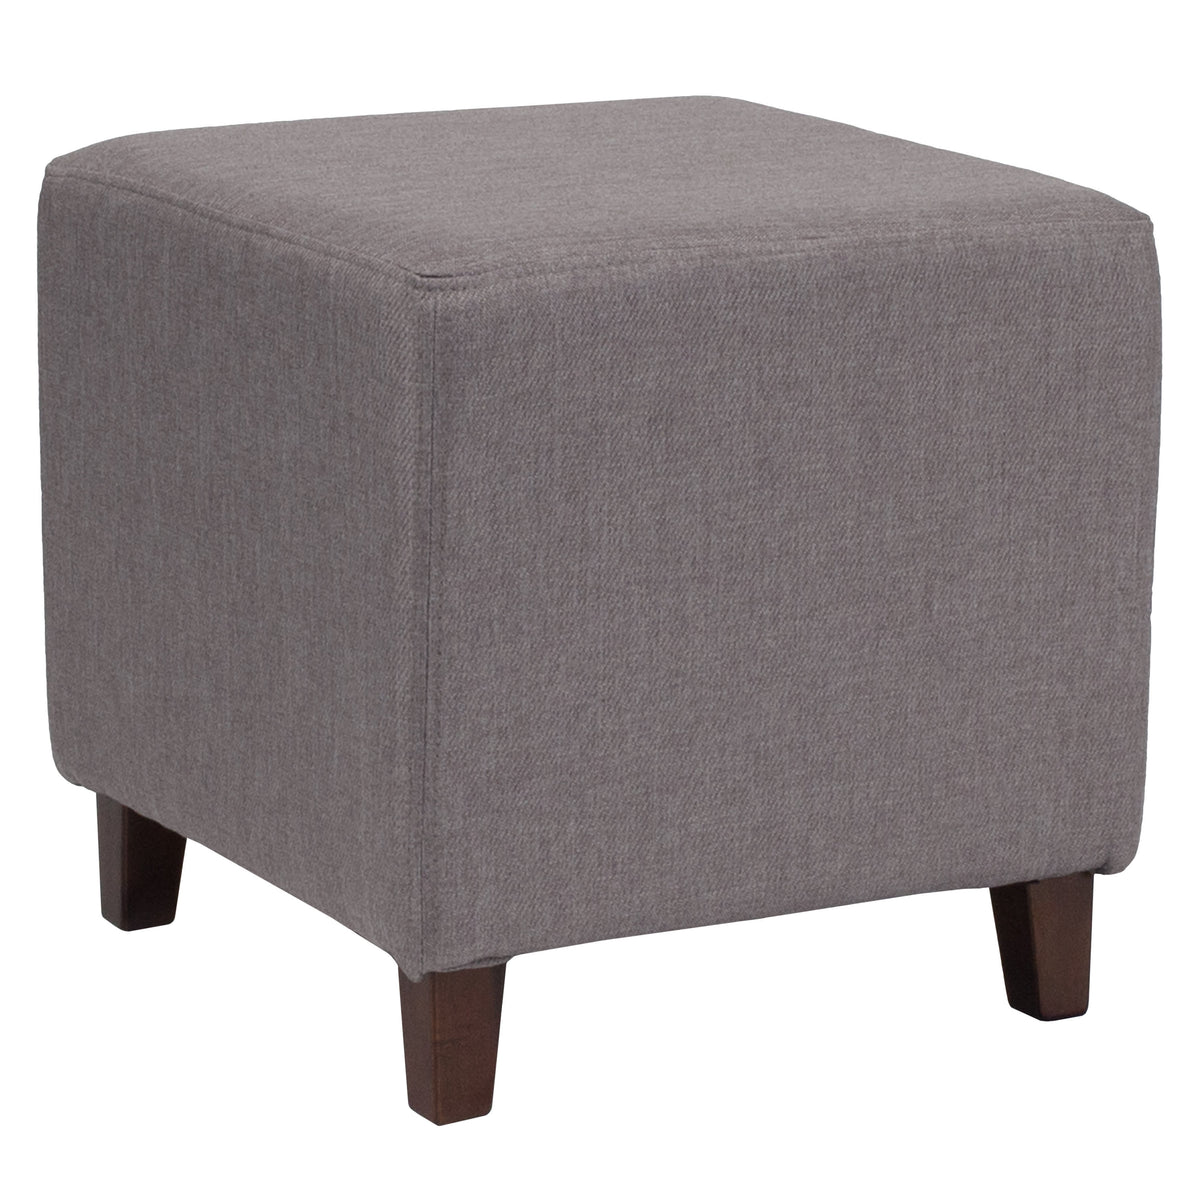 Light Gray Fabric |#| Taut Upholstered Cube Ottoman Pouf in Light Gray Fabric - Home Furniture